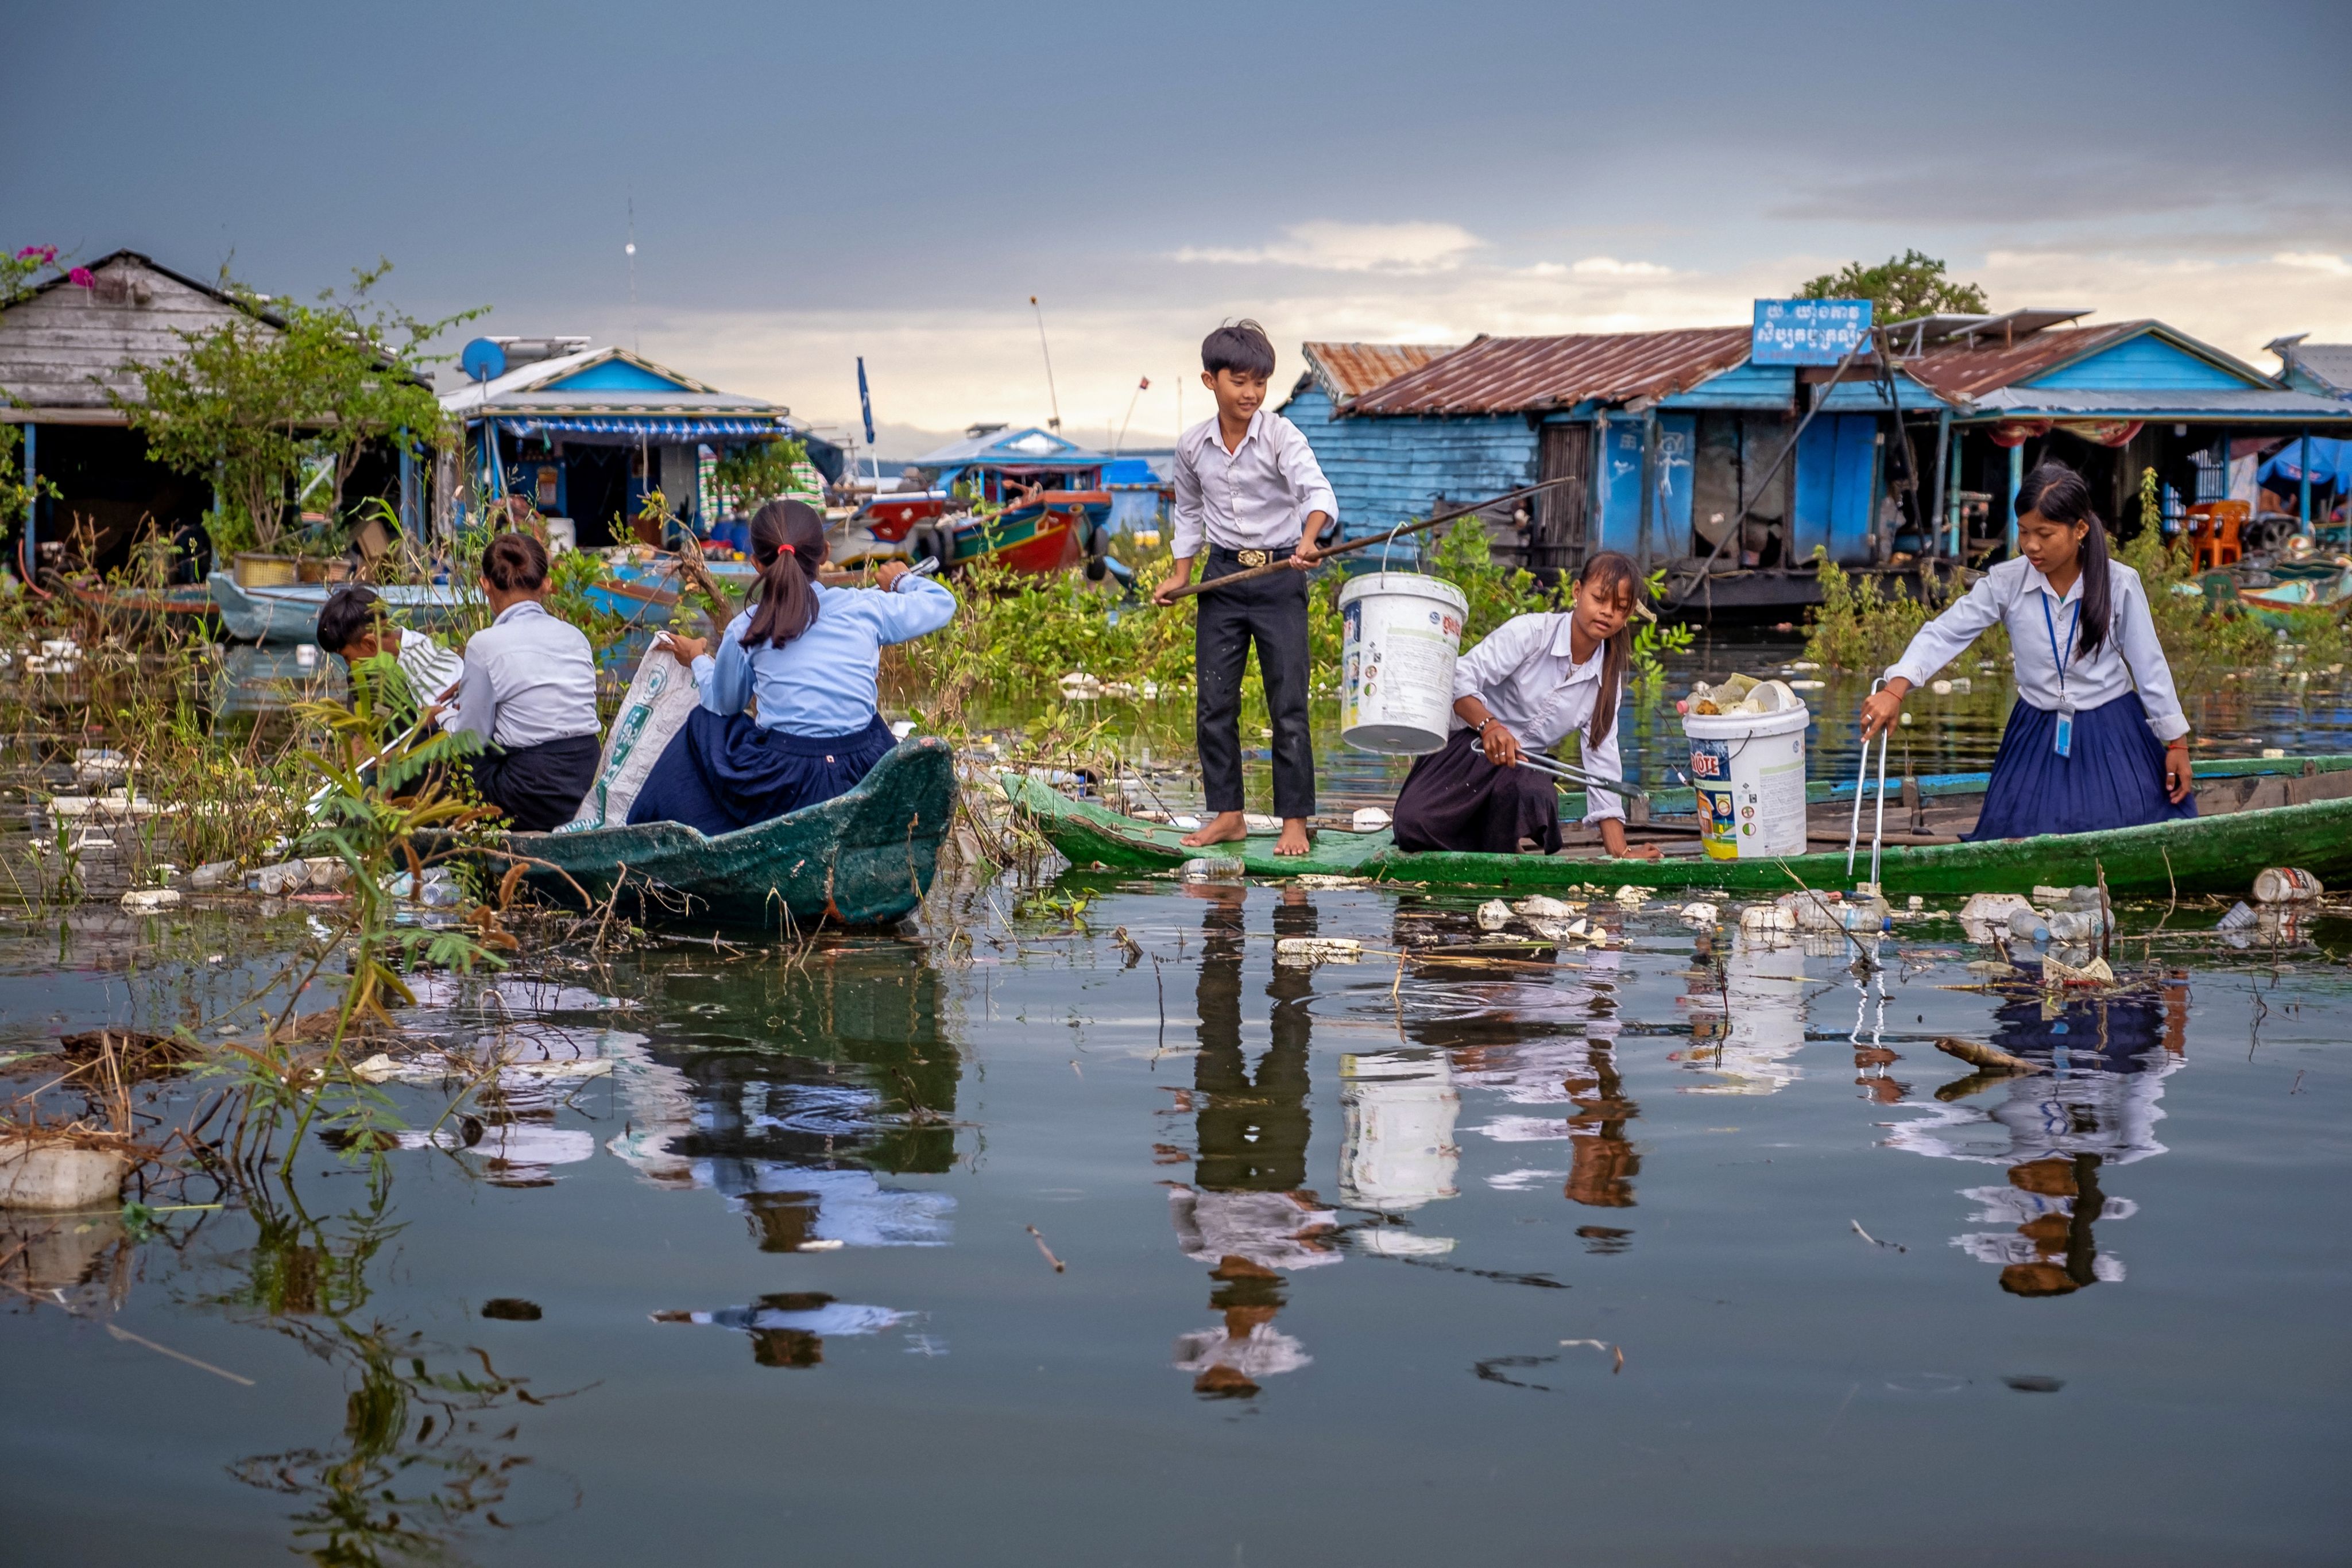 Ratana, 12, and her classmates collect rubbish from Tonle Sap Lake, Cambodia.